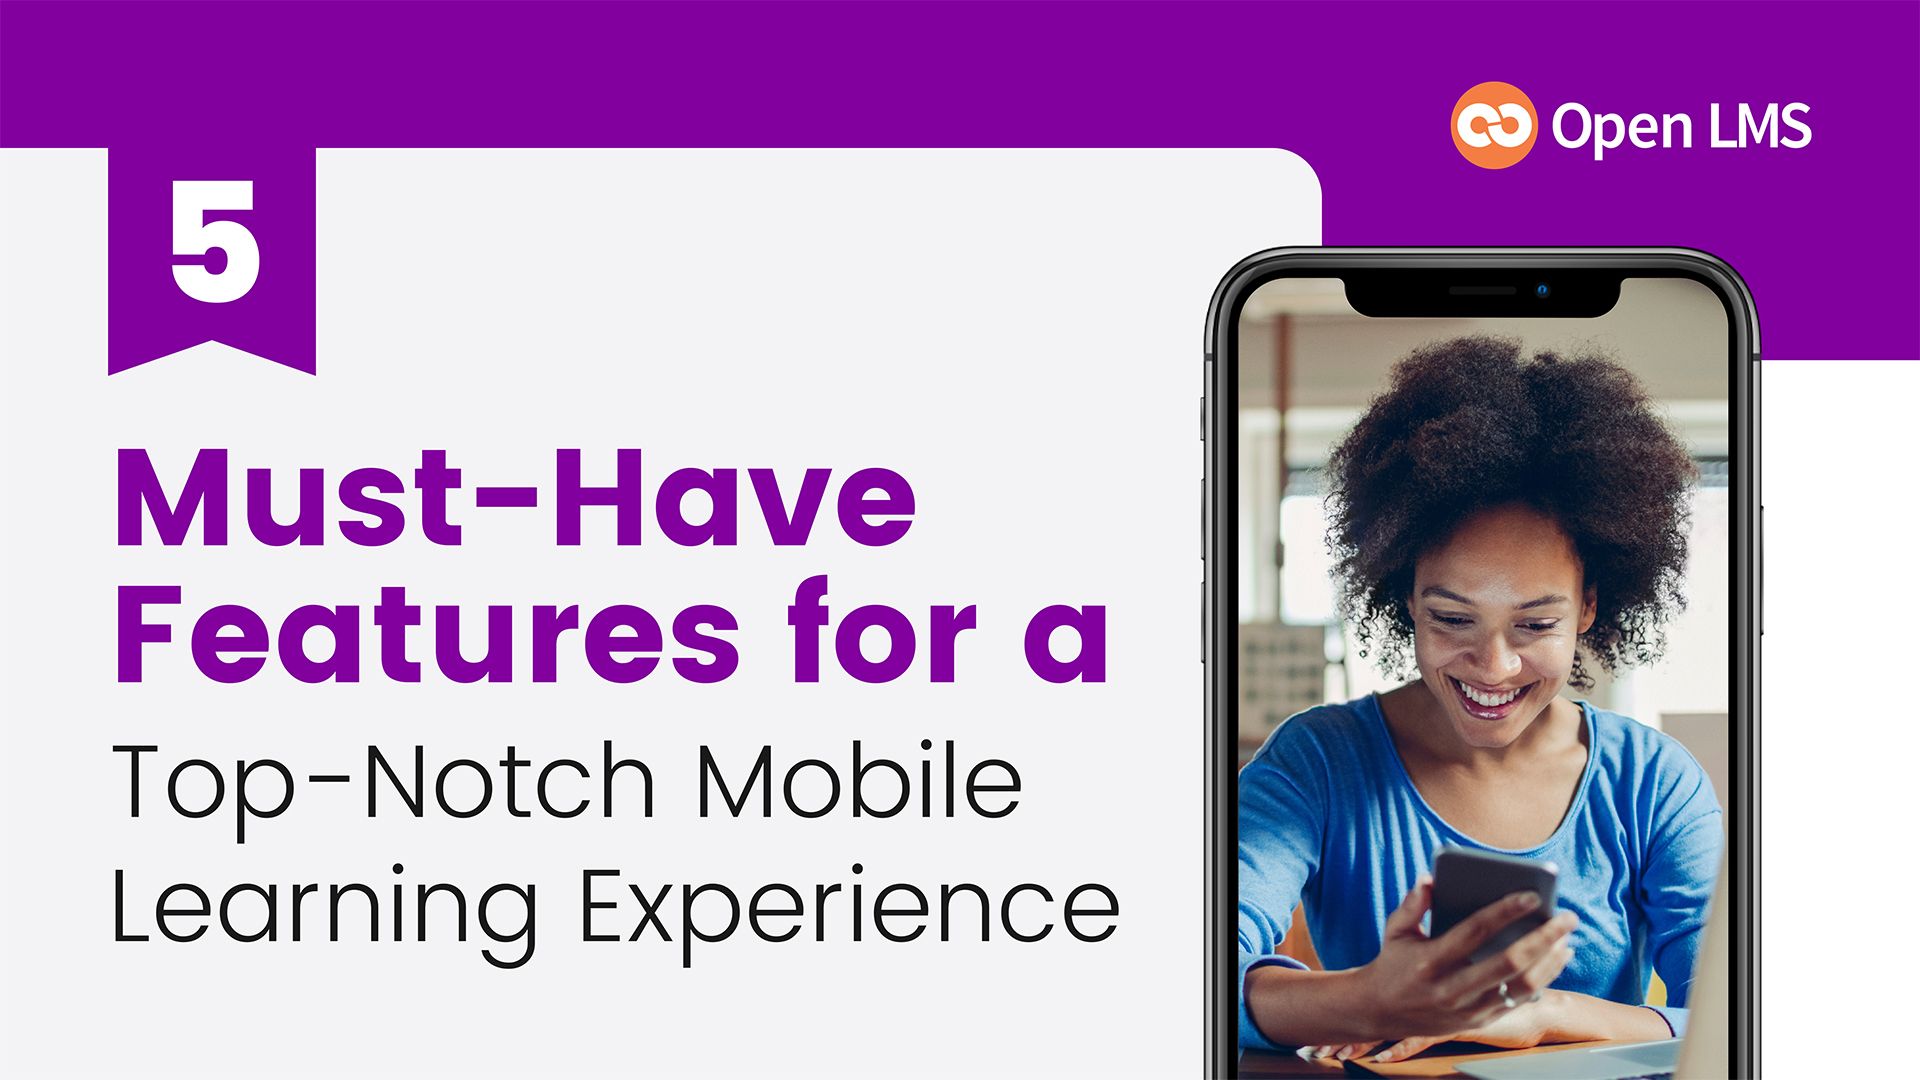 5 Must-Have Features for a Top-Notch Mobile Learning Experience